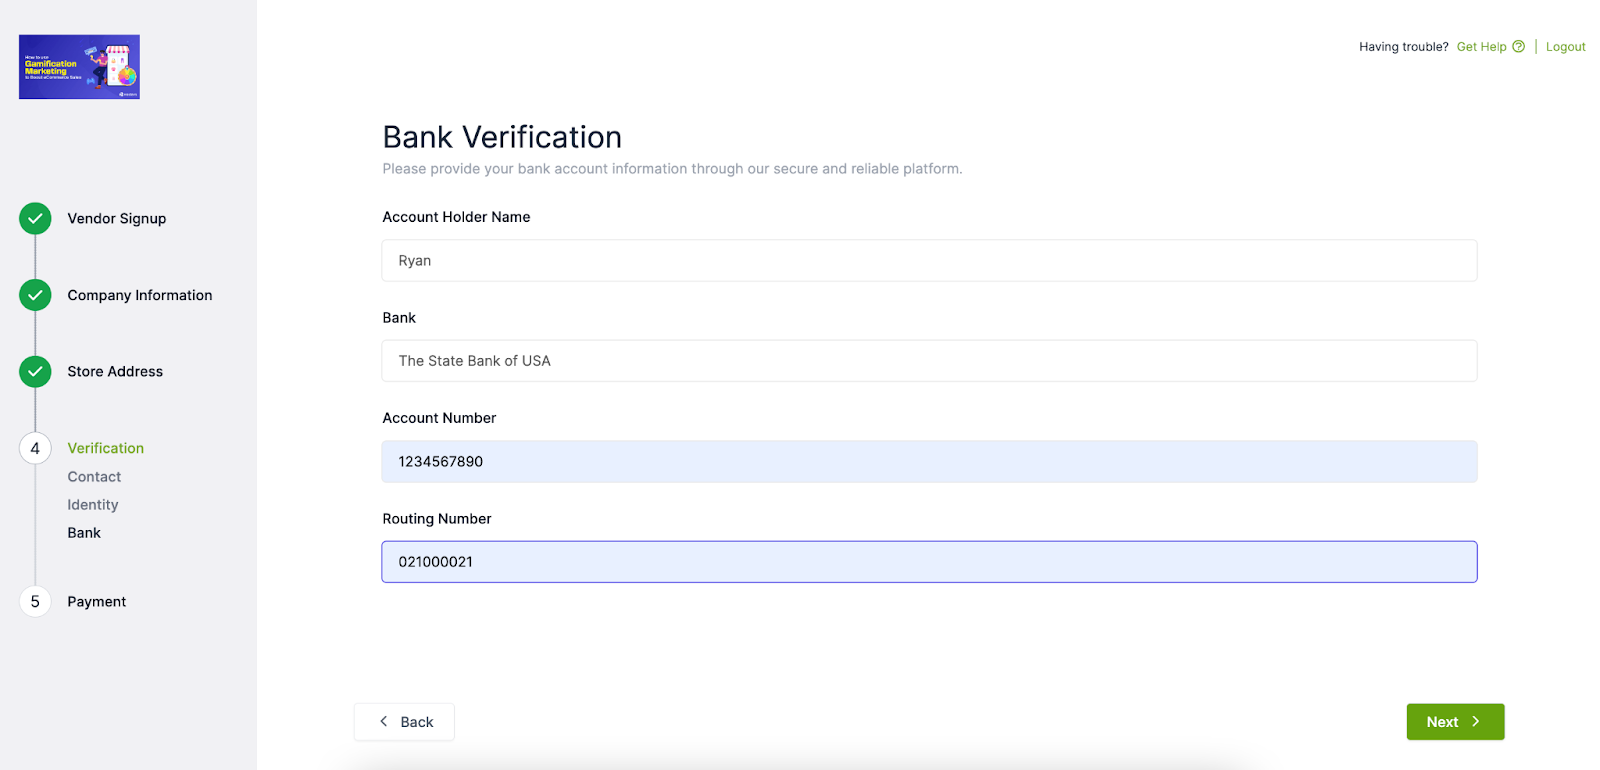 This image shows the bank verification of the vendor